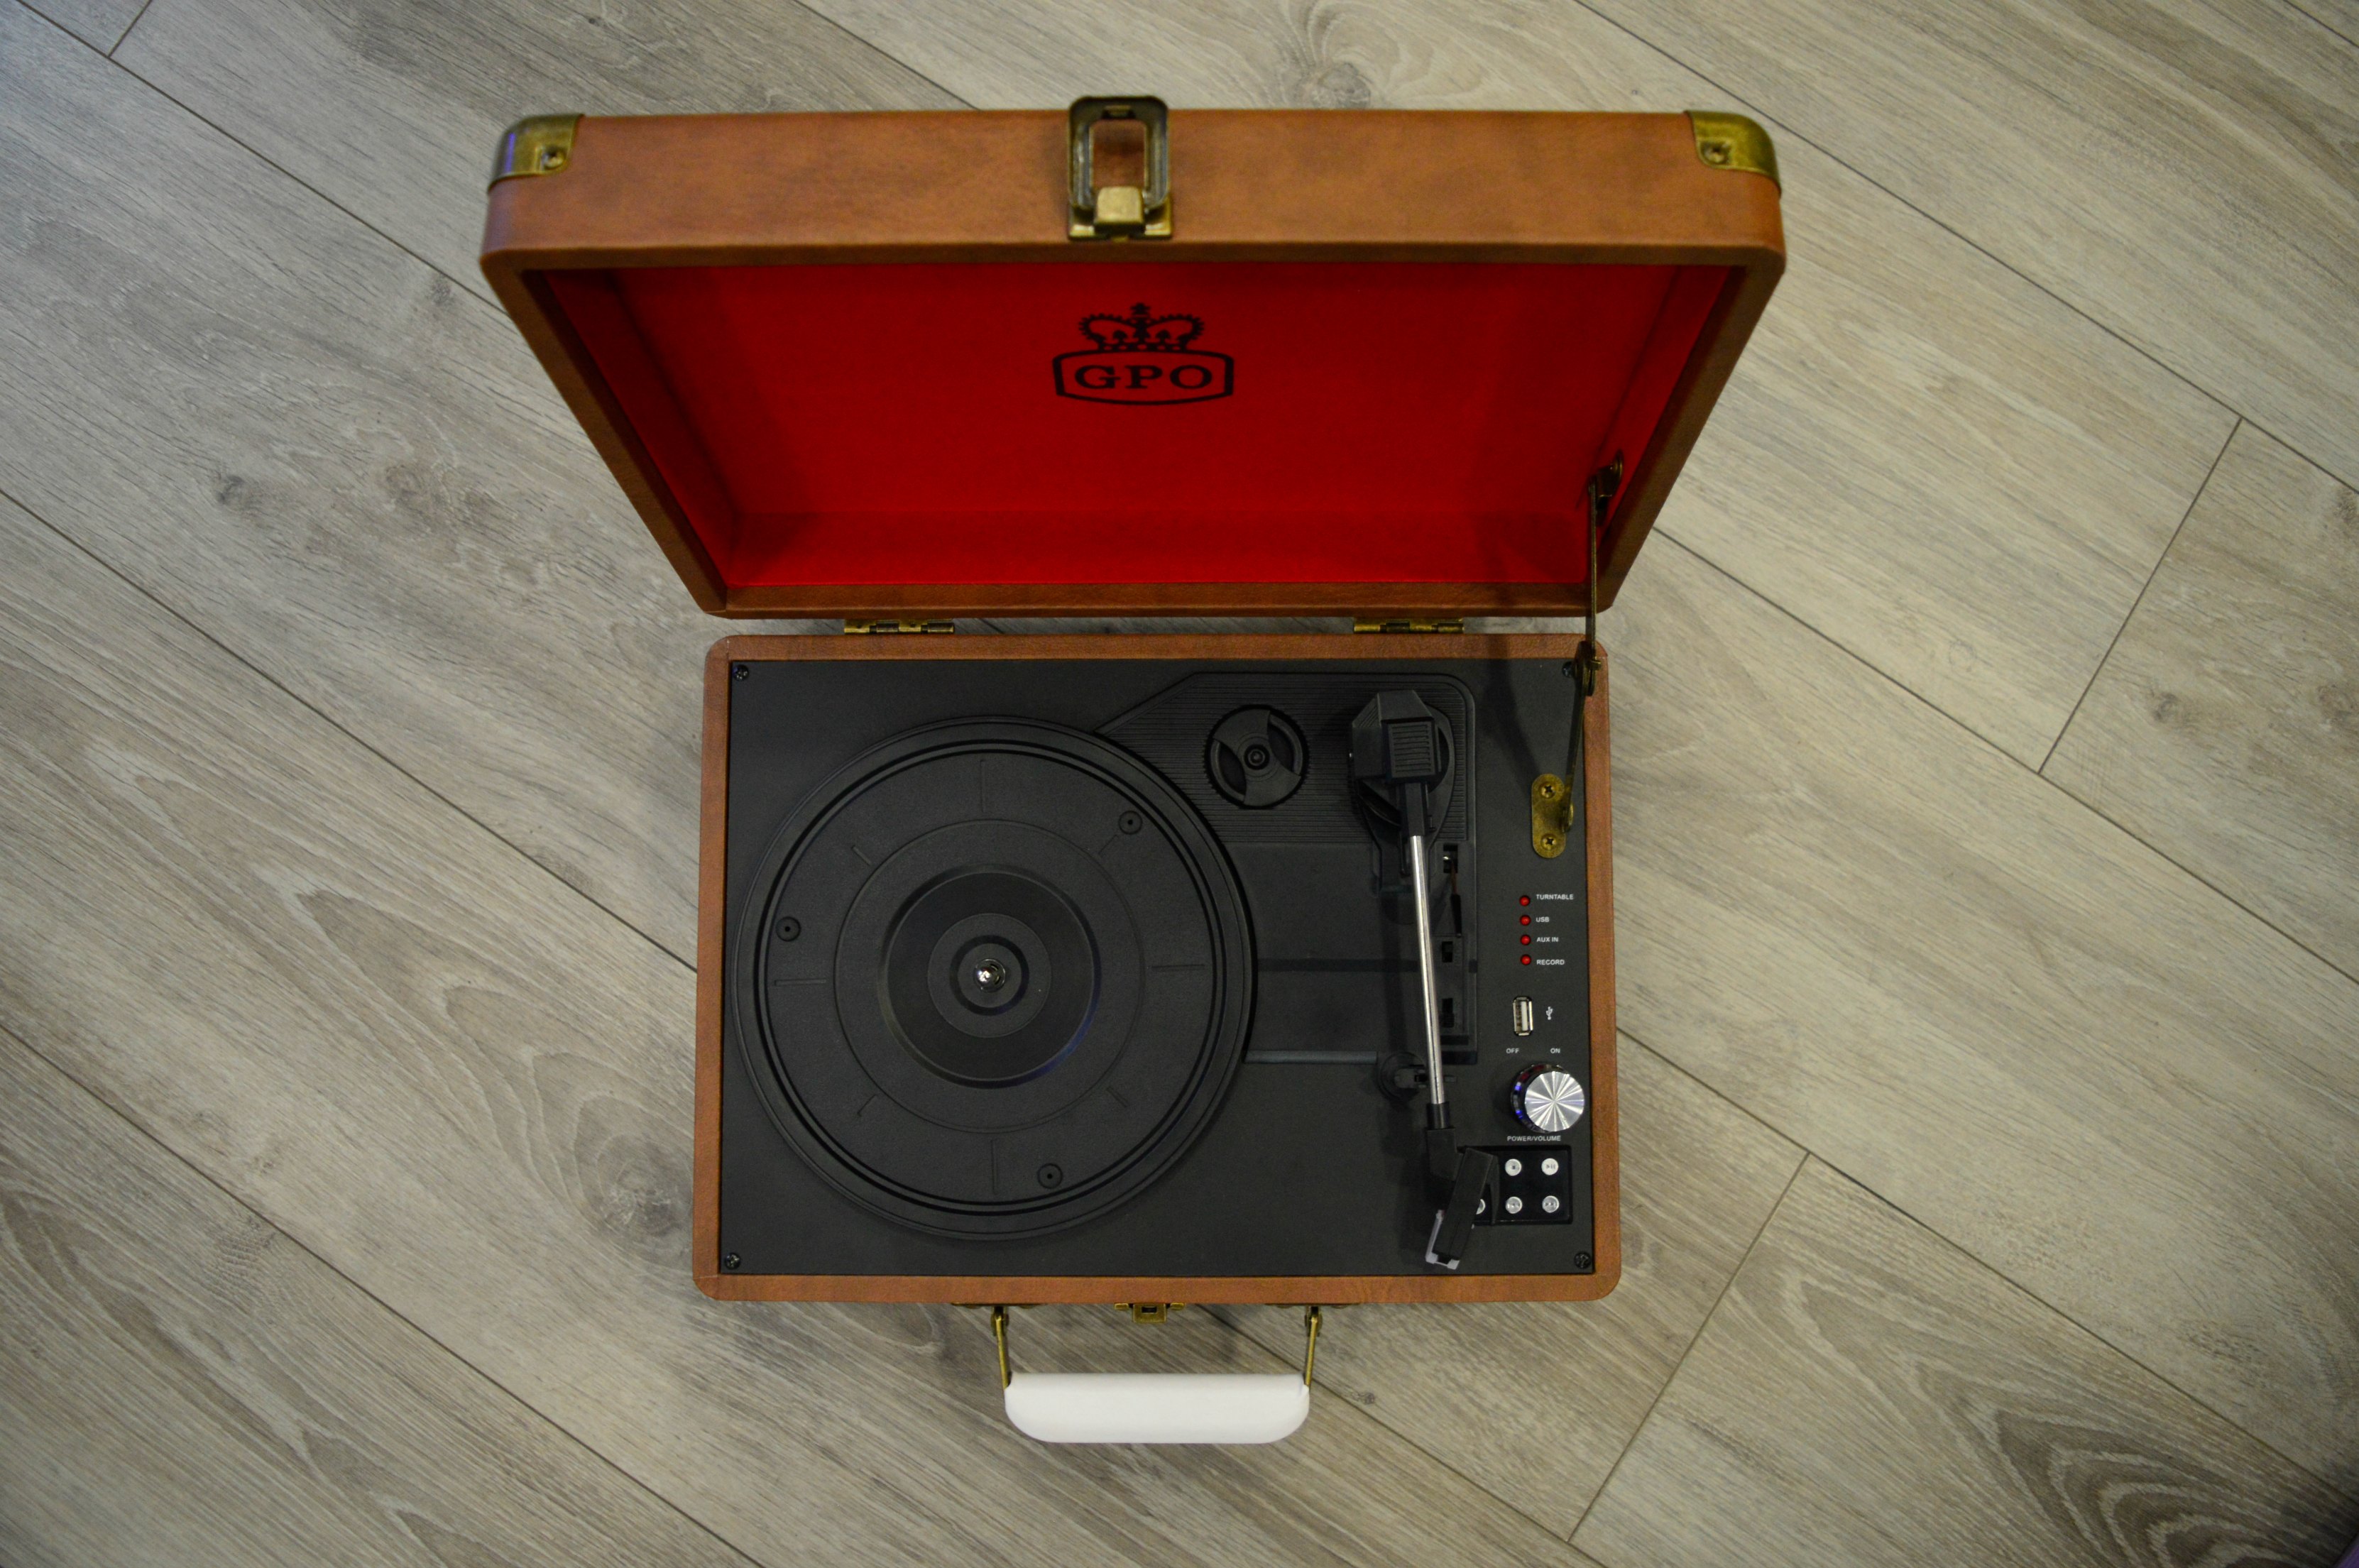 Fathers Day gift idea - Record Player